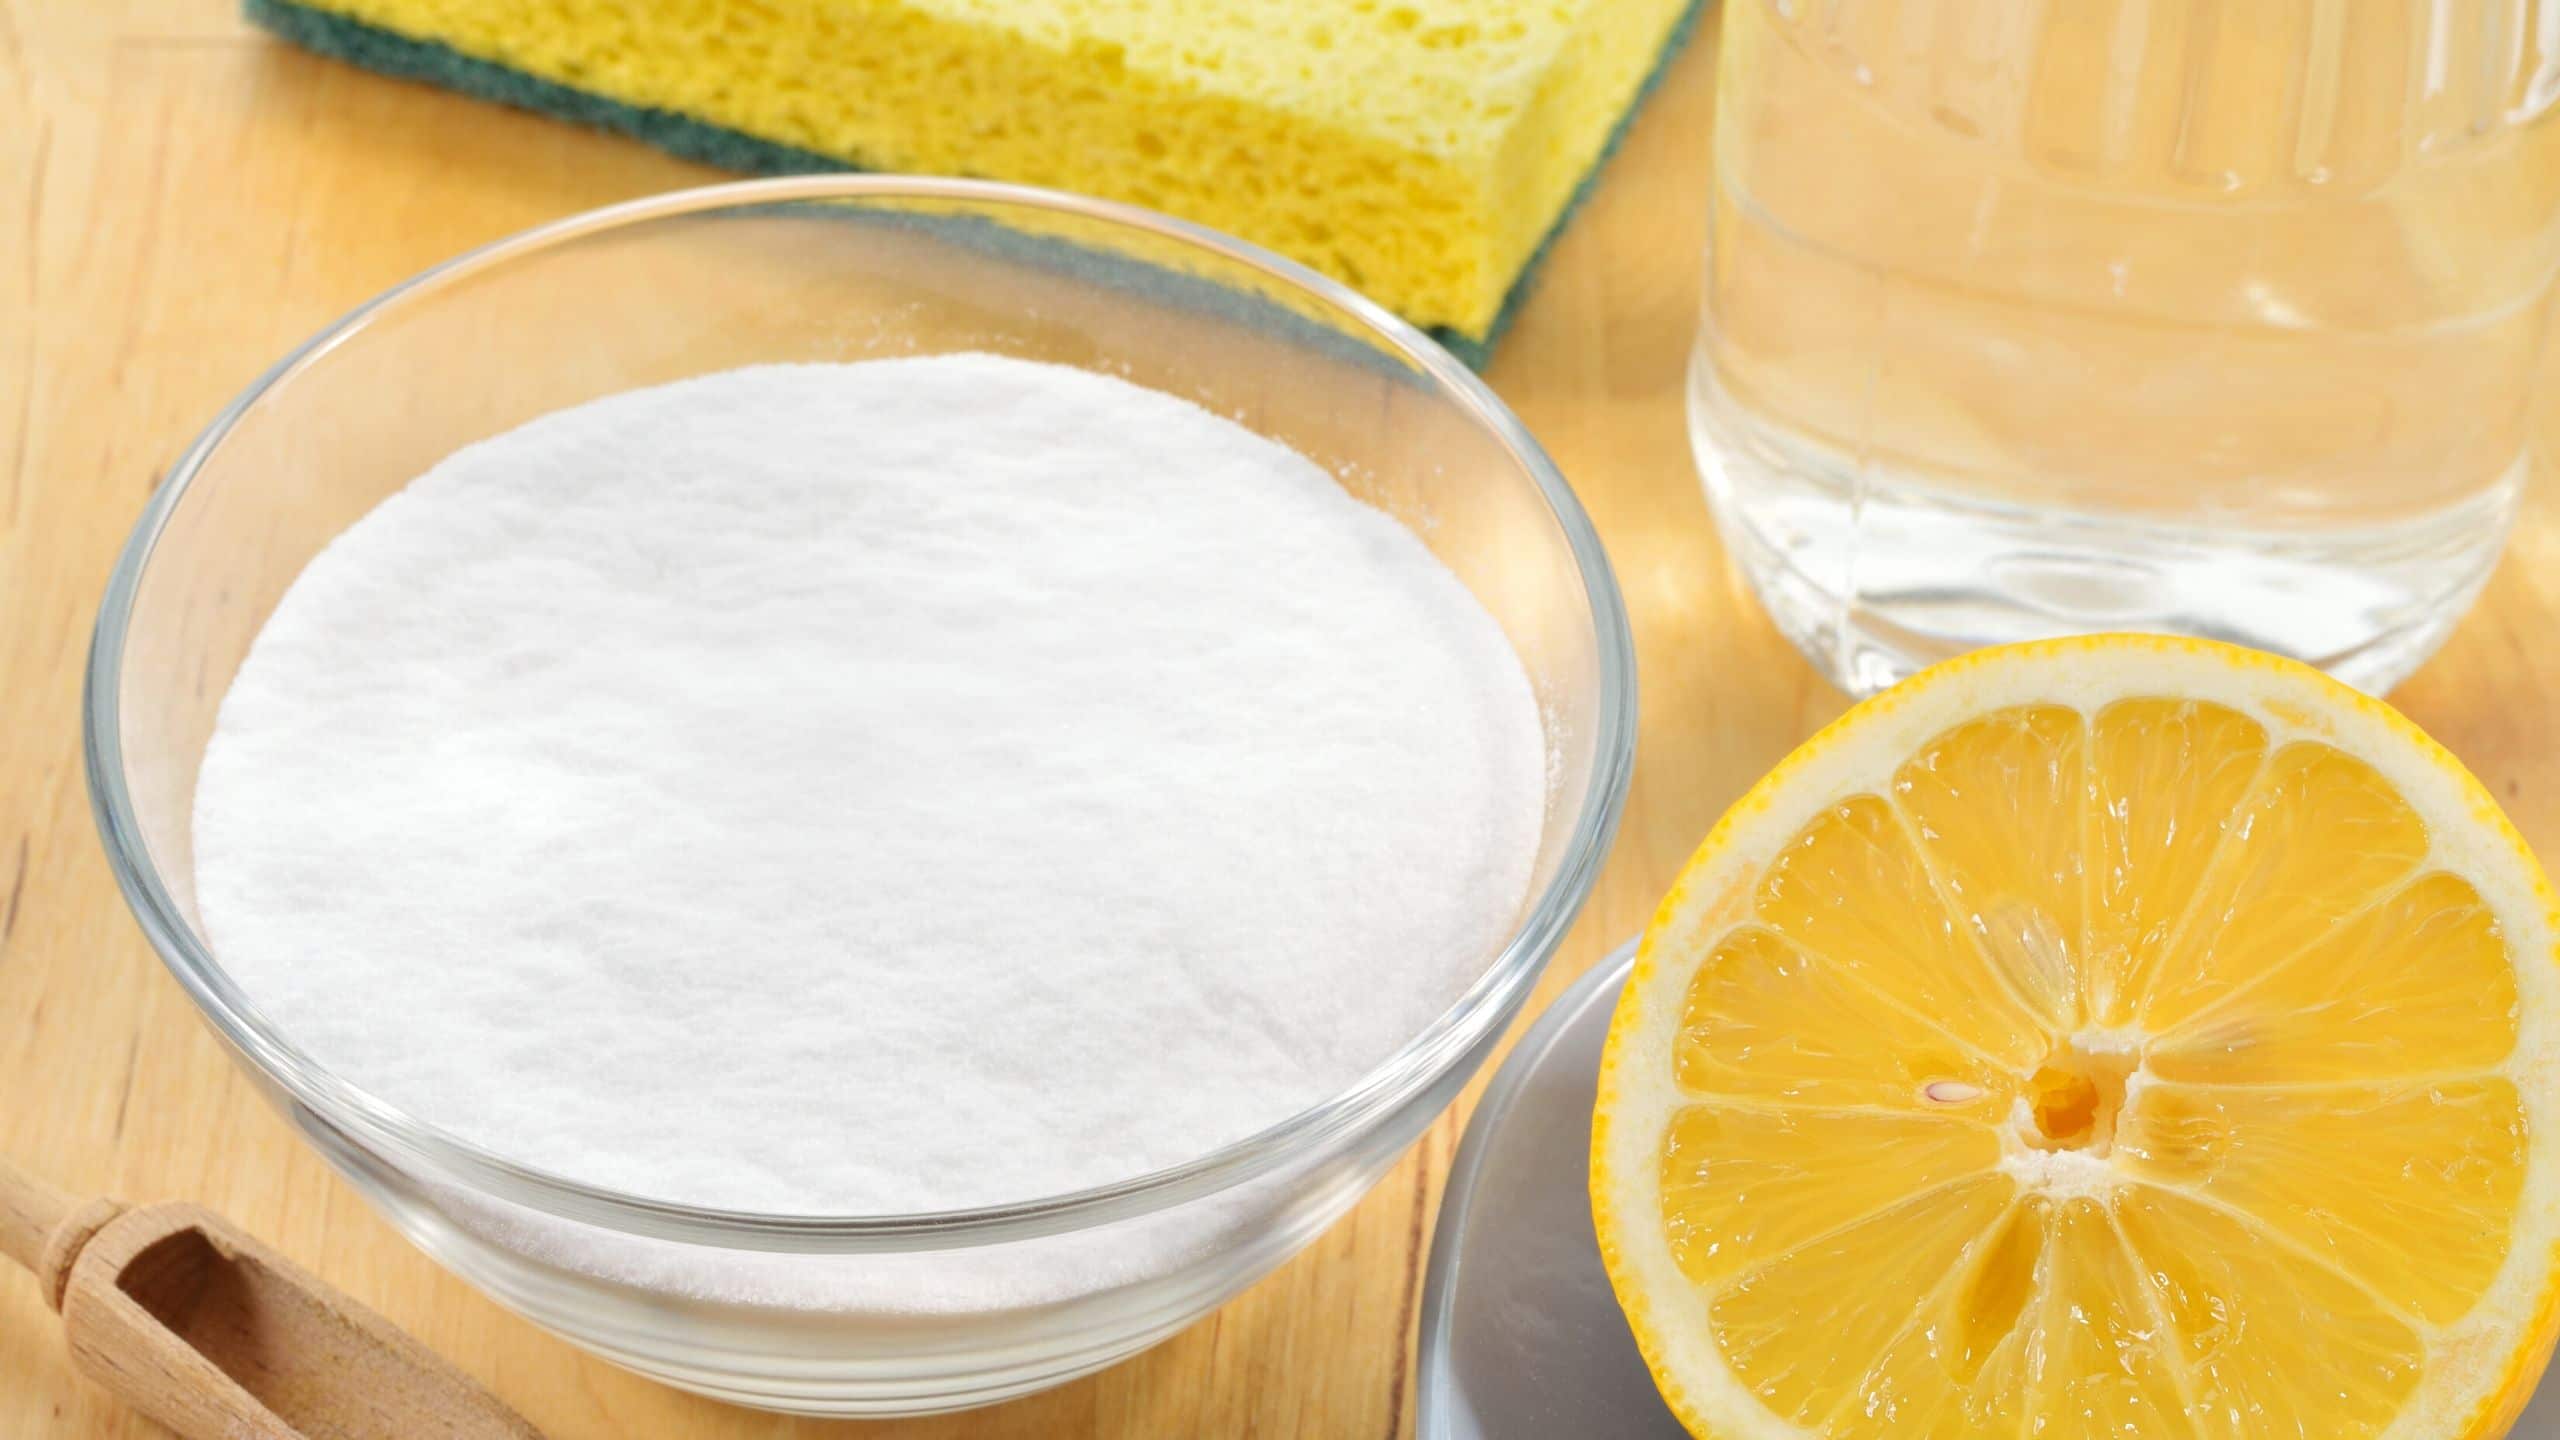 You are currently viewing Lemon and Baking Soda For Health, Skin, and Hair